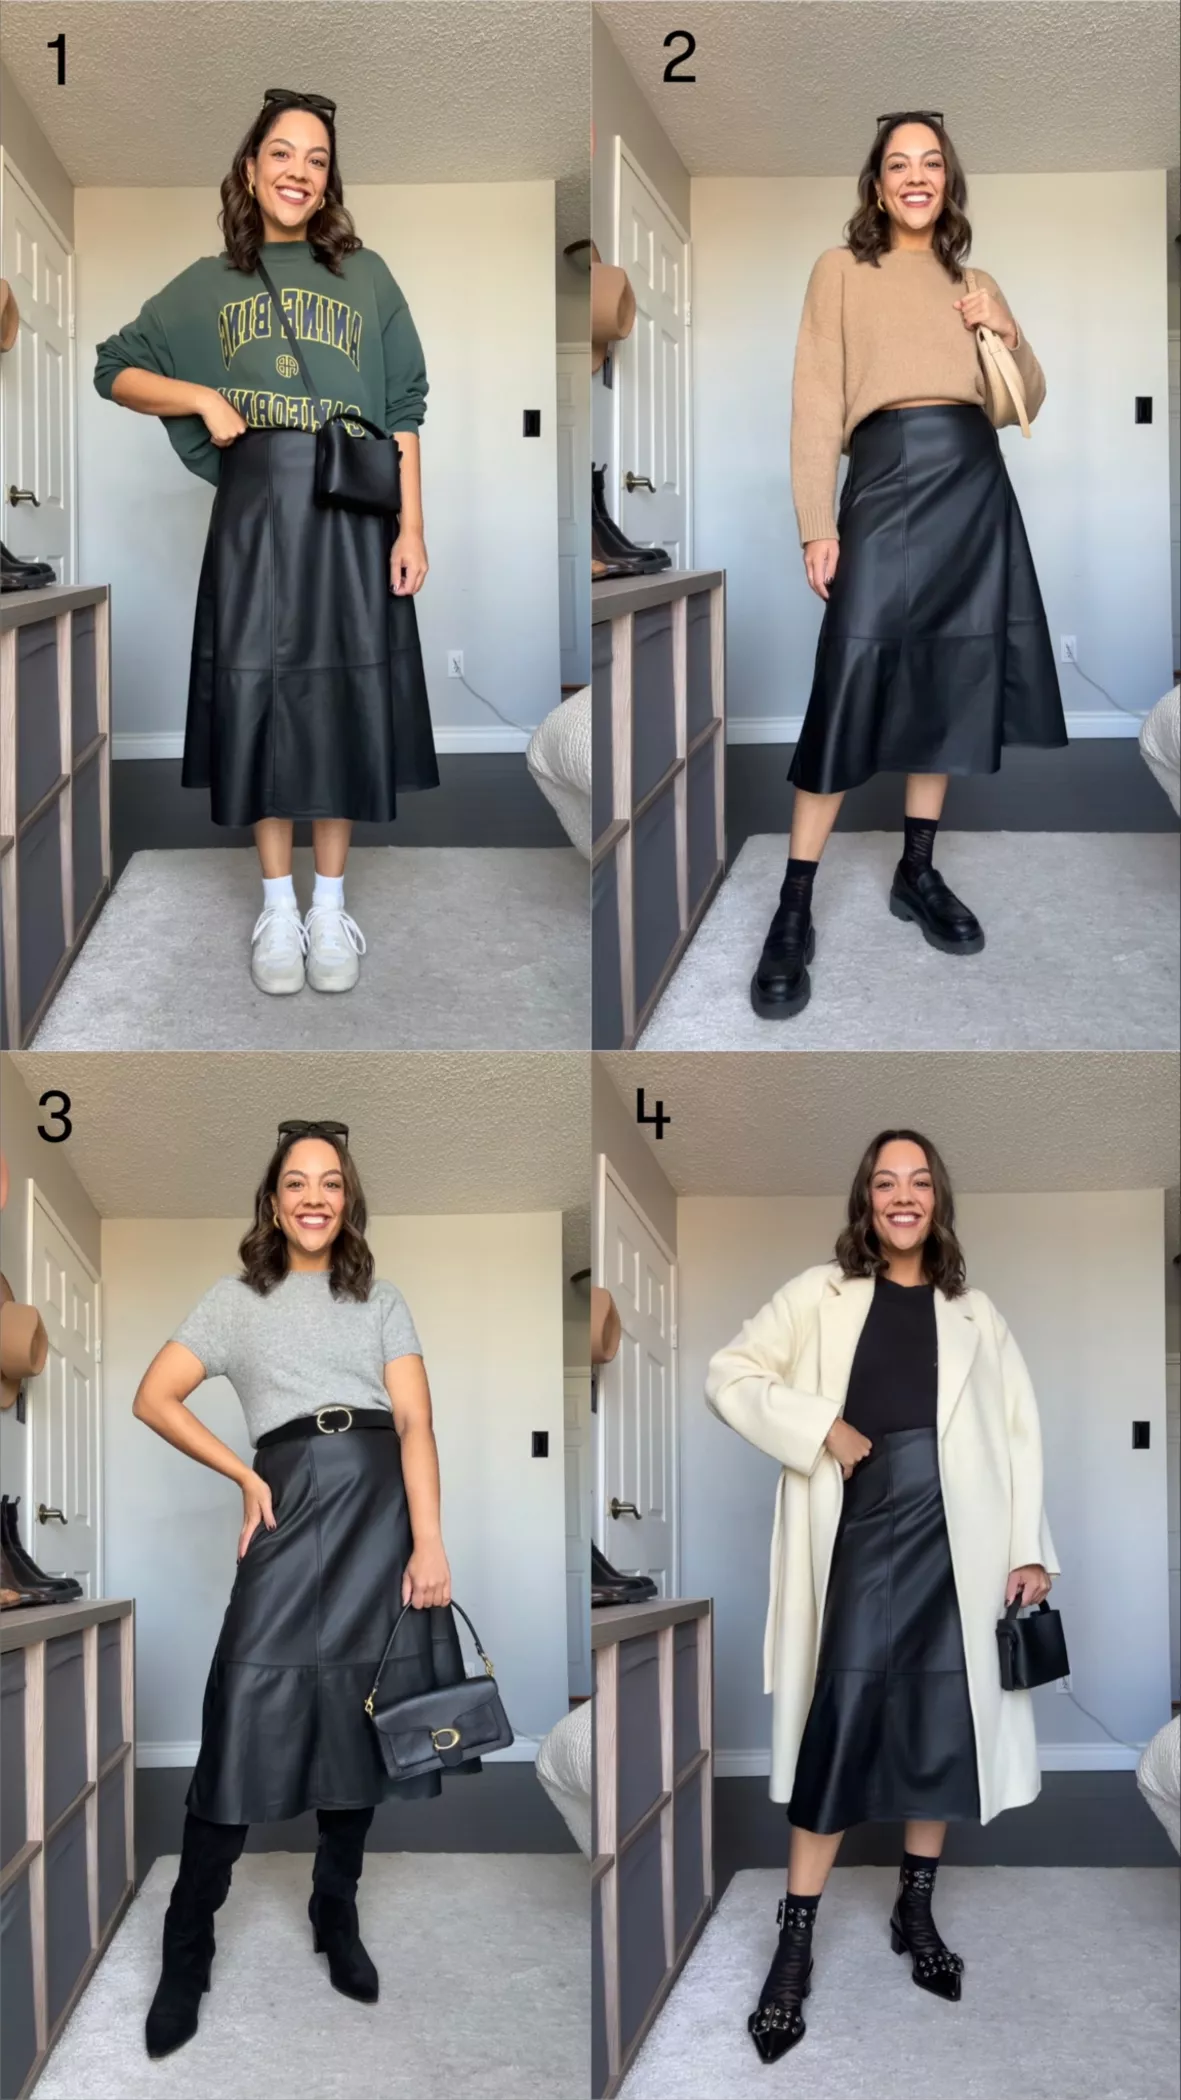 Dark Green Mini Skirt with Black Tights Outfits (4 ideas & outfits